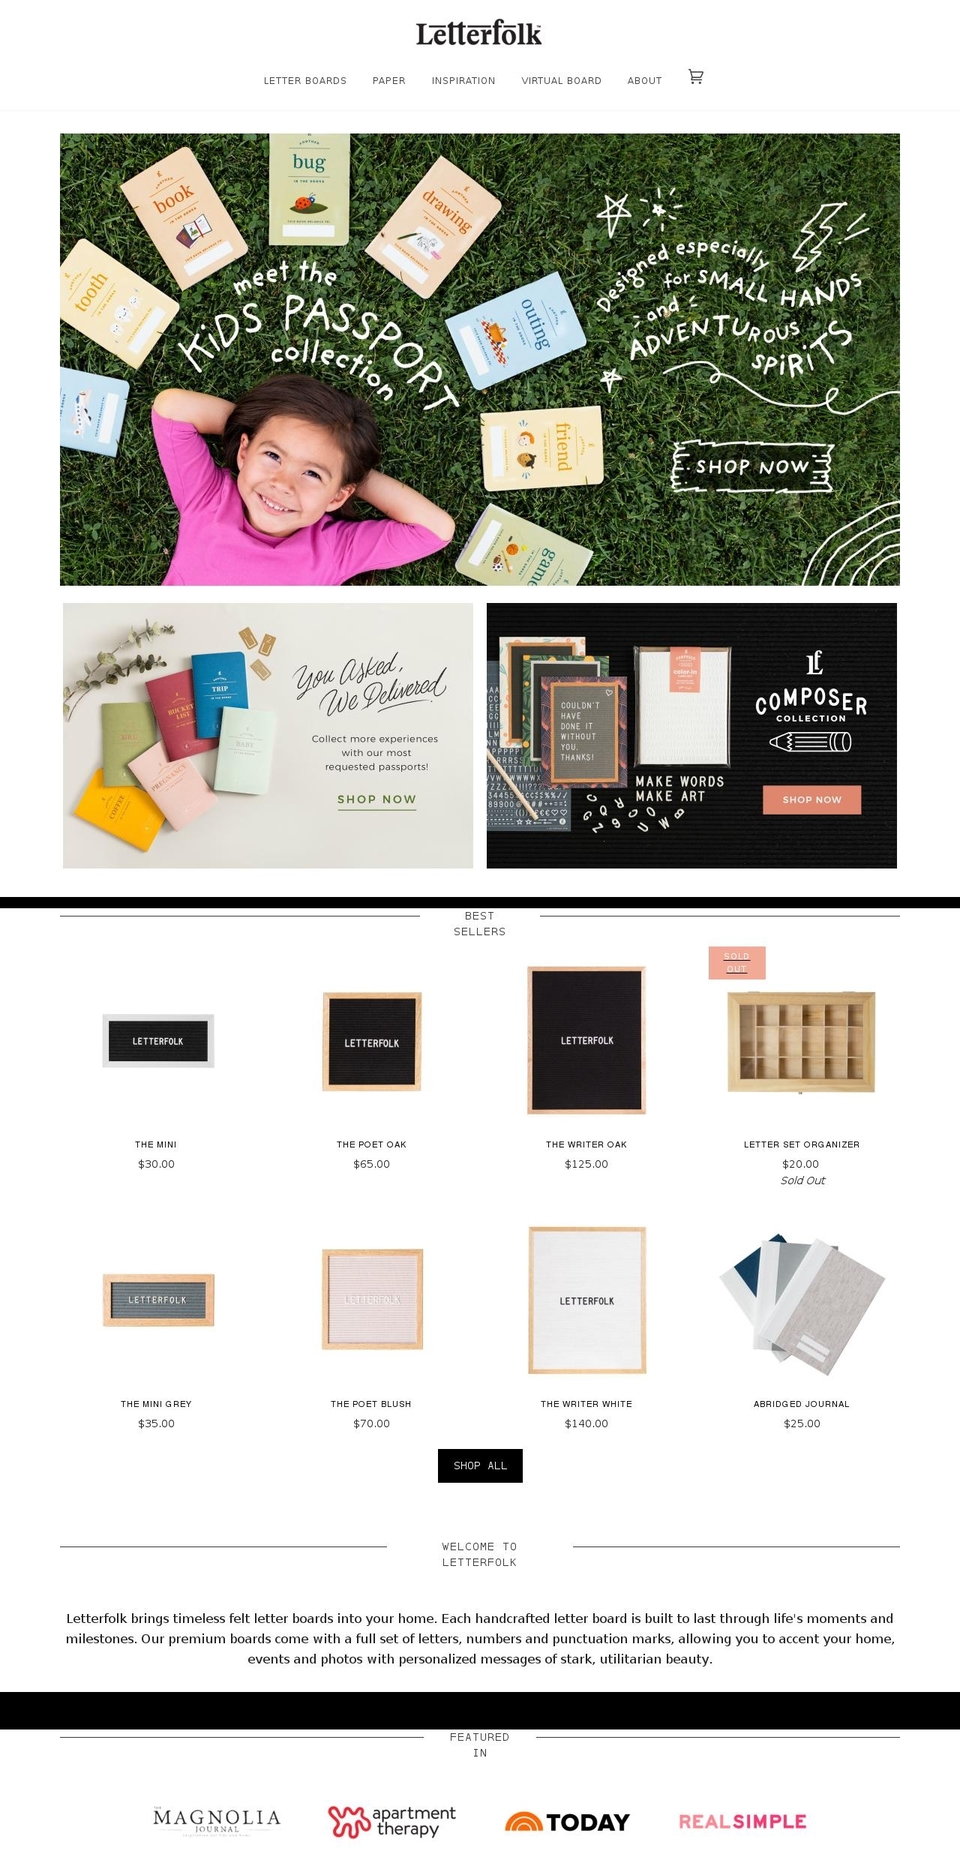 Pipeline (1\/30\/18) Shopify theme site example letterfolkco.com